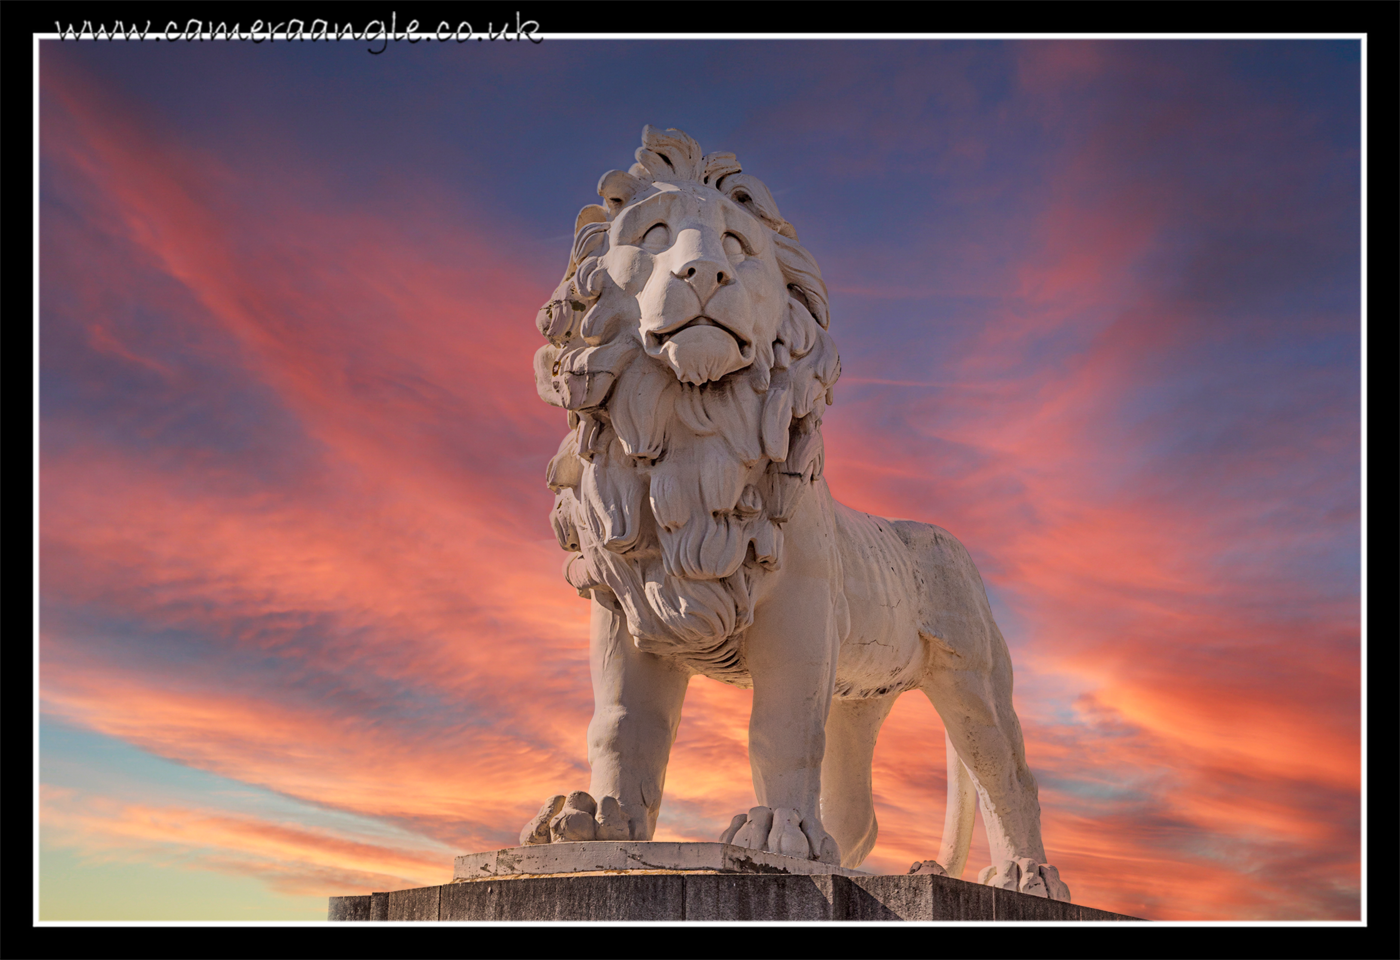 LION
Totally not abusing the new Photoshop Sky replacement feature :)
Keywords: London 2022 LION